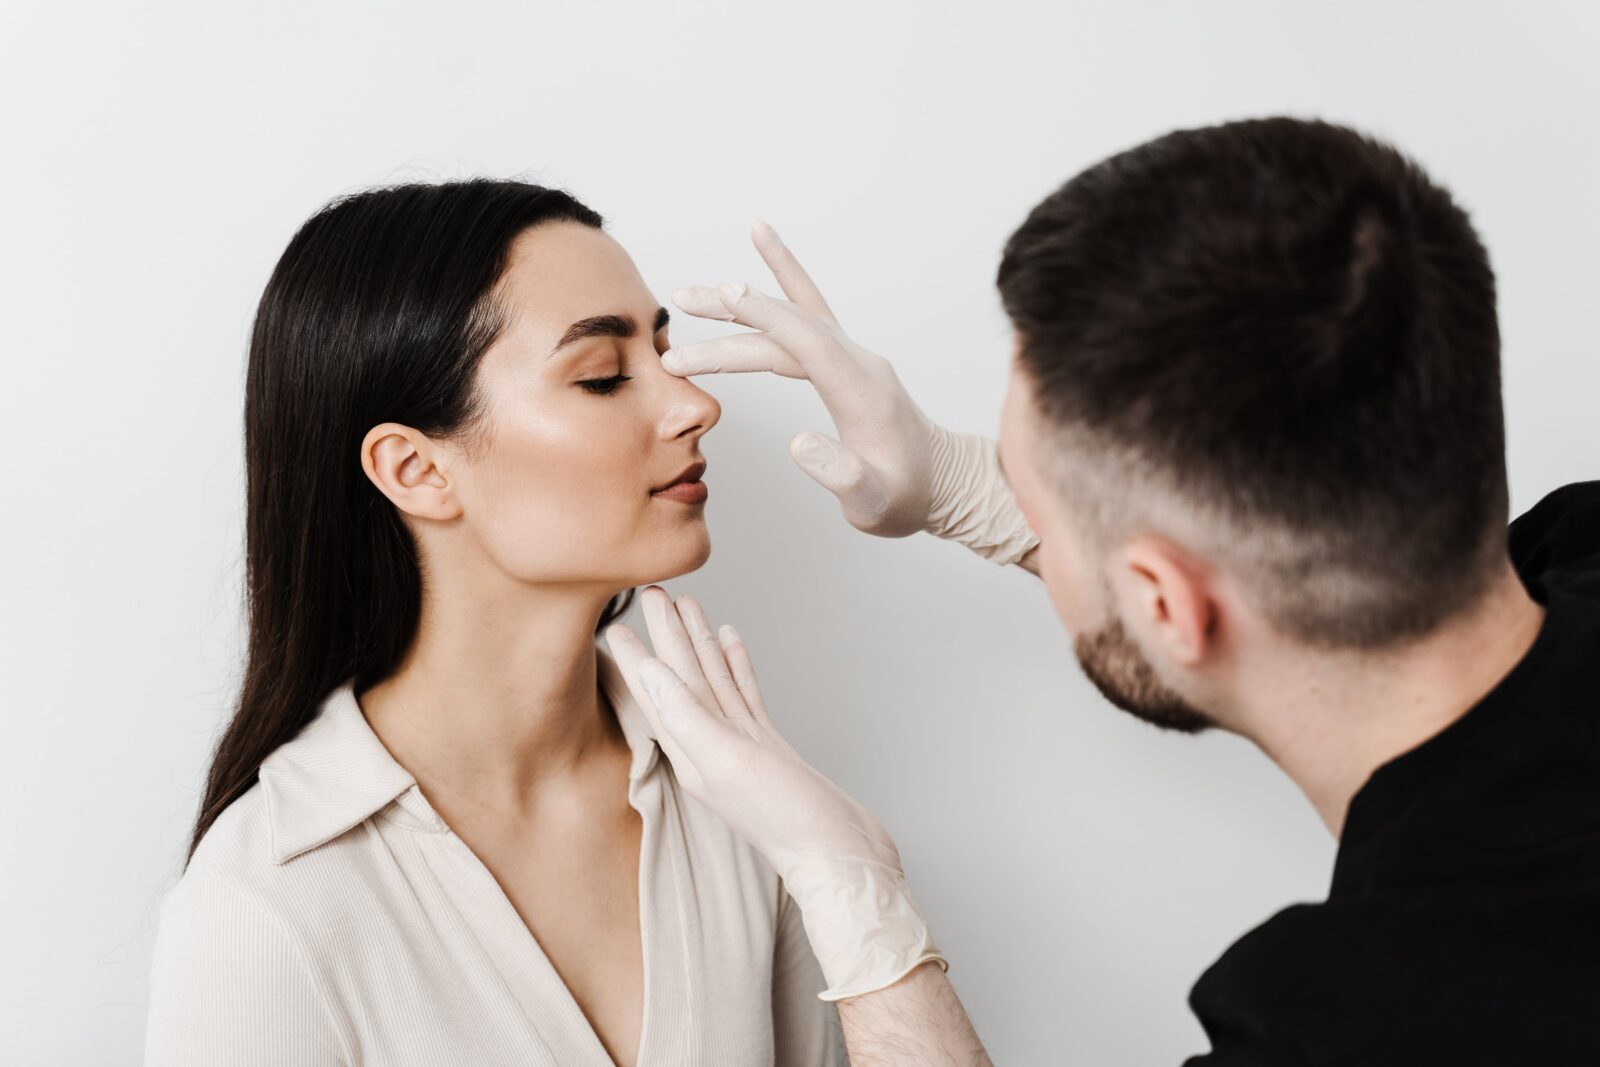 ENT doctor is touching nose and consulting girl patient in medical clinic before septoplasty surgery. Rhinoplasty is reshaping nose surgery for change appearance of the nose and improve breathing